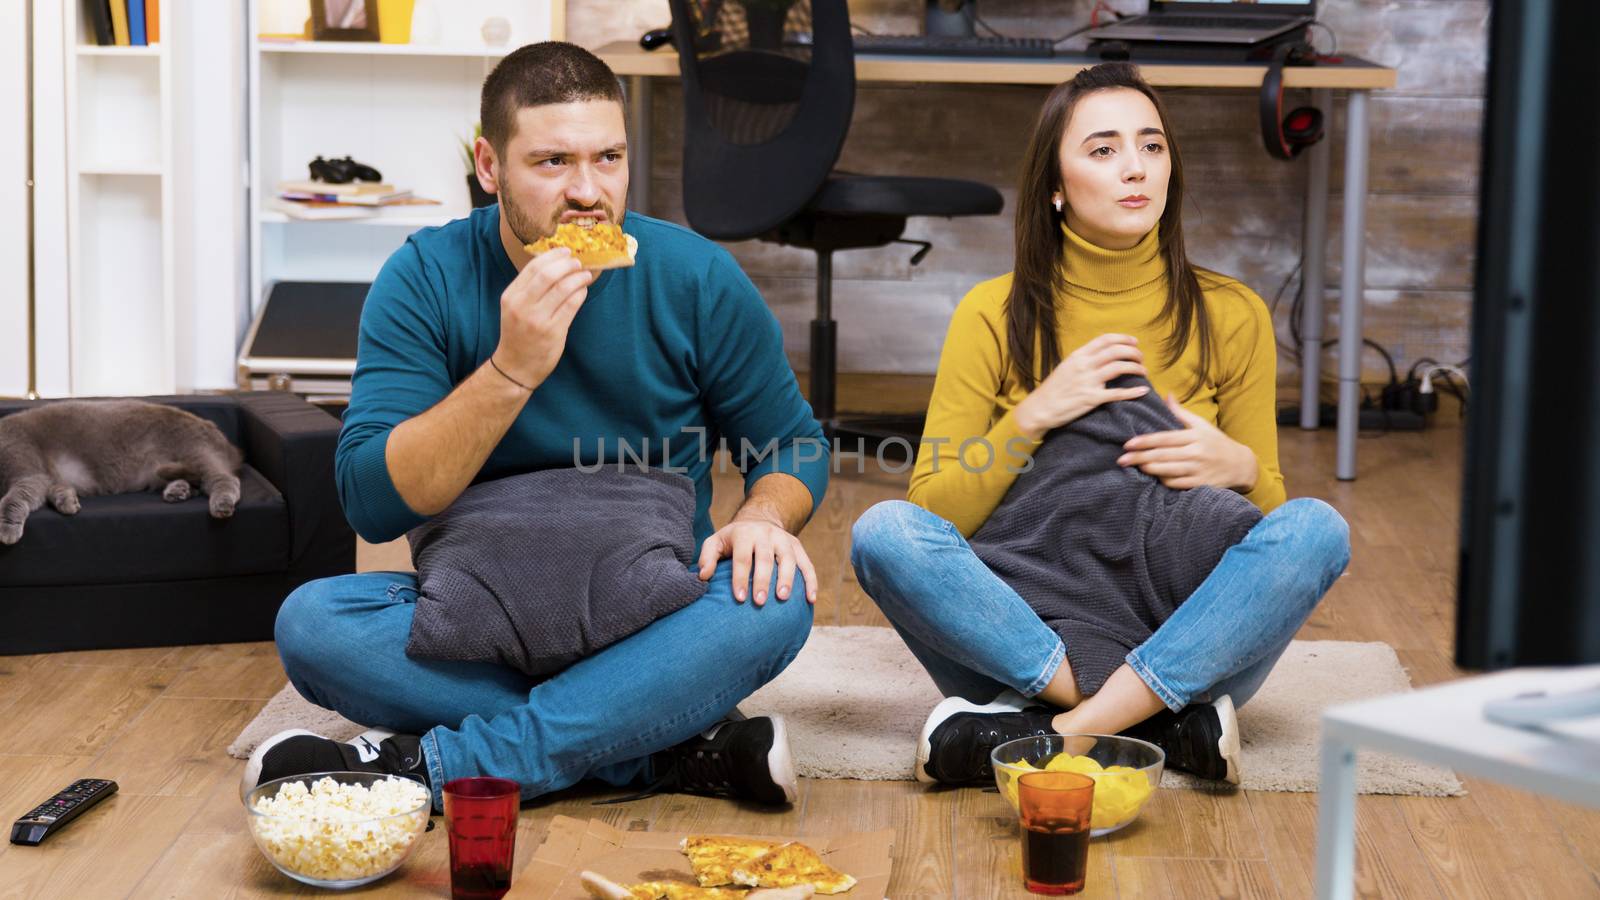 Disappointed couple sitting on the floor while watching sport on tv and eating pizza with their cat sleeping.